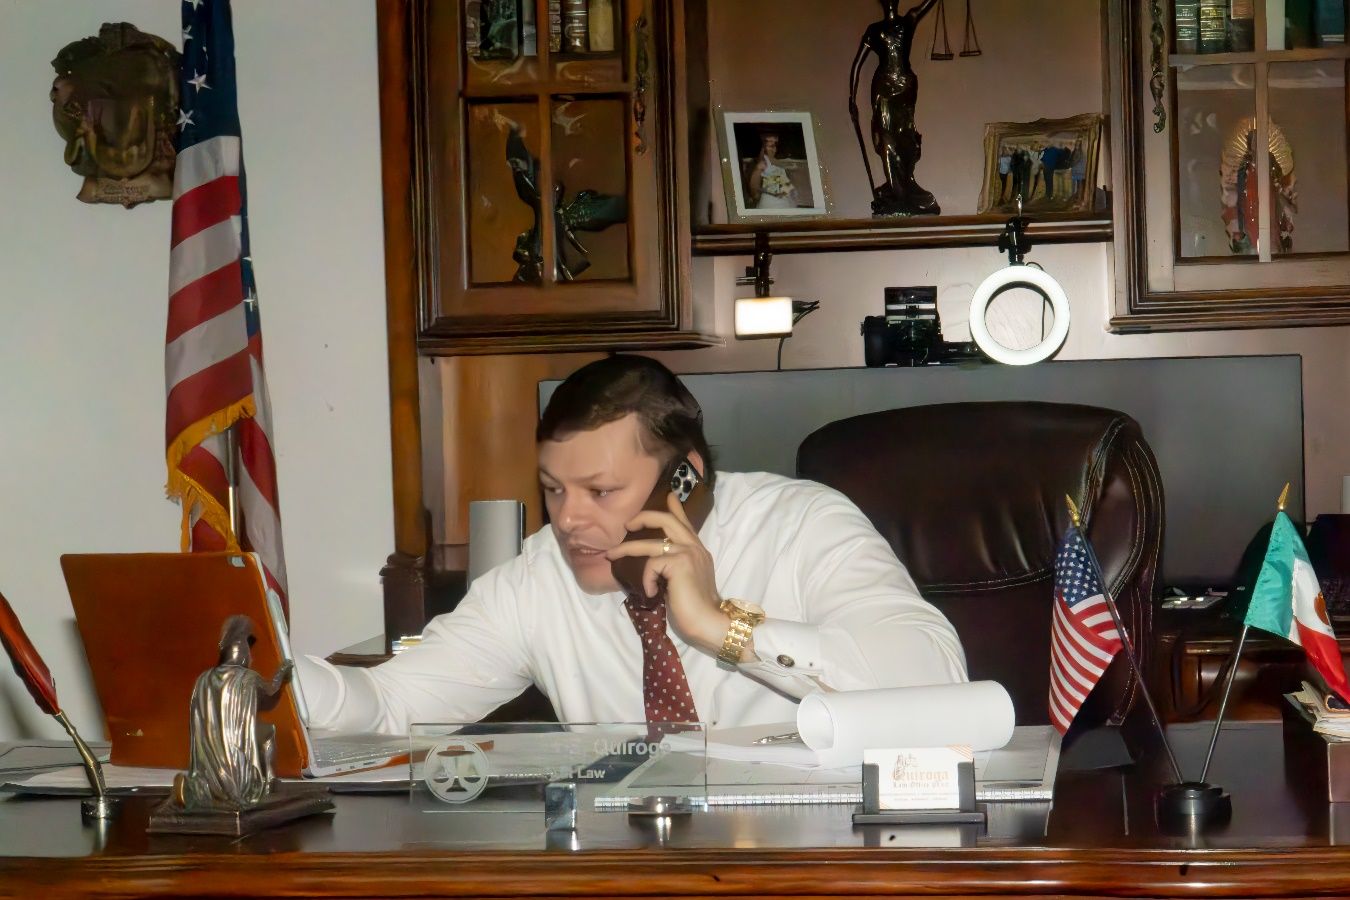 A person in a white shirt and tie sitting at a desk talking on the phone Description automatically generated